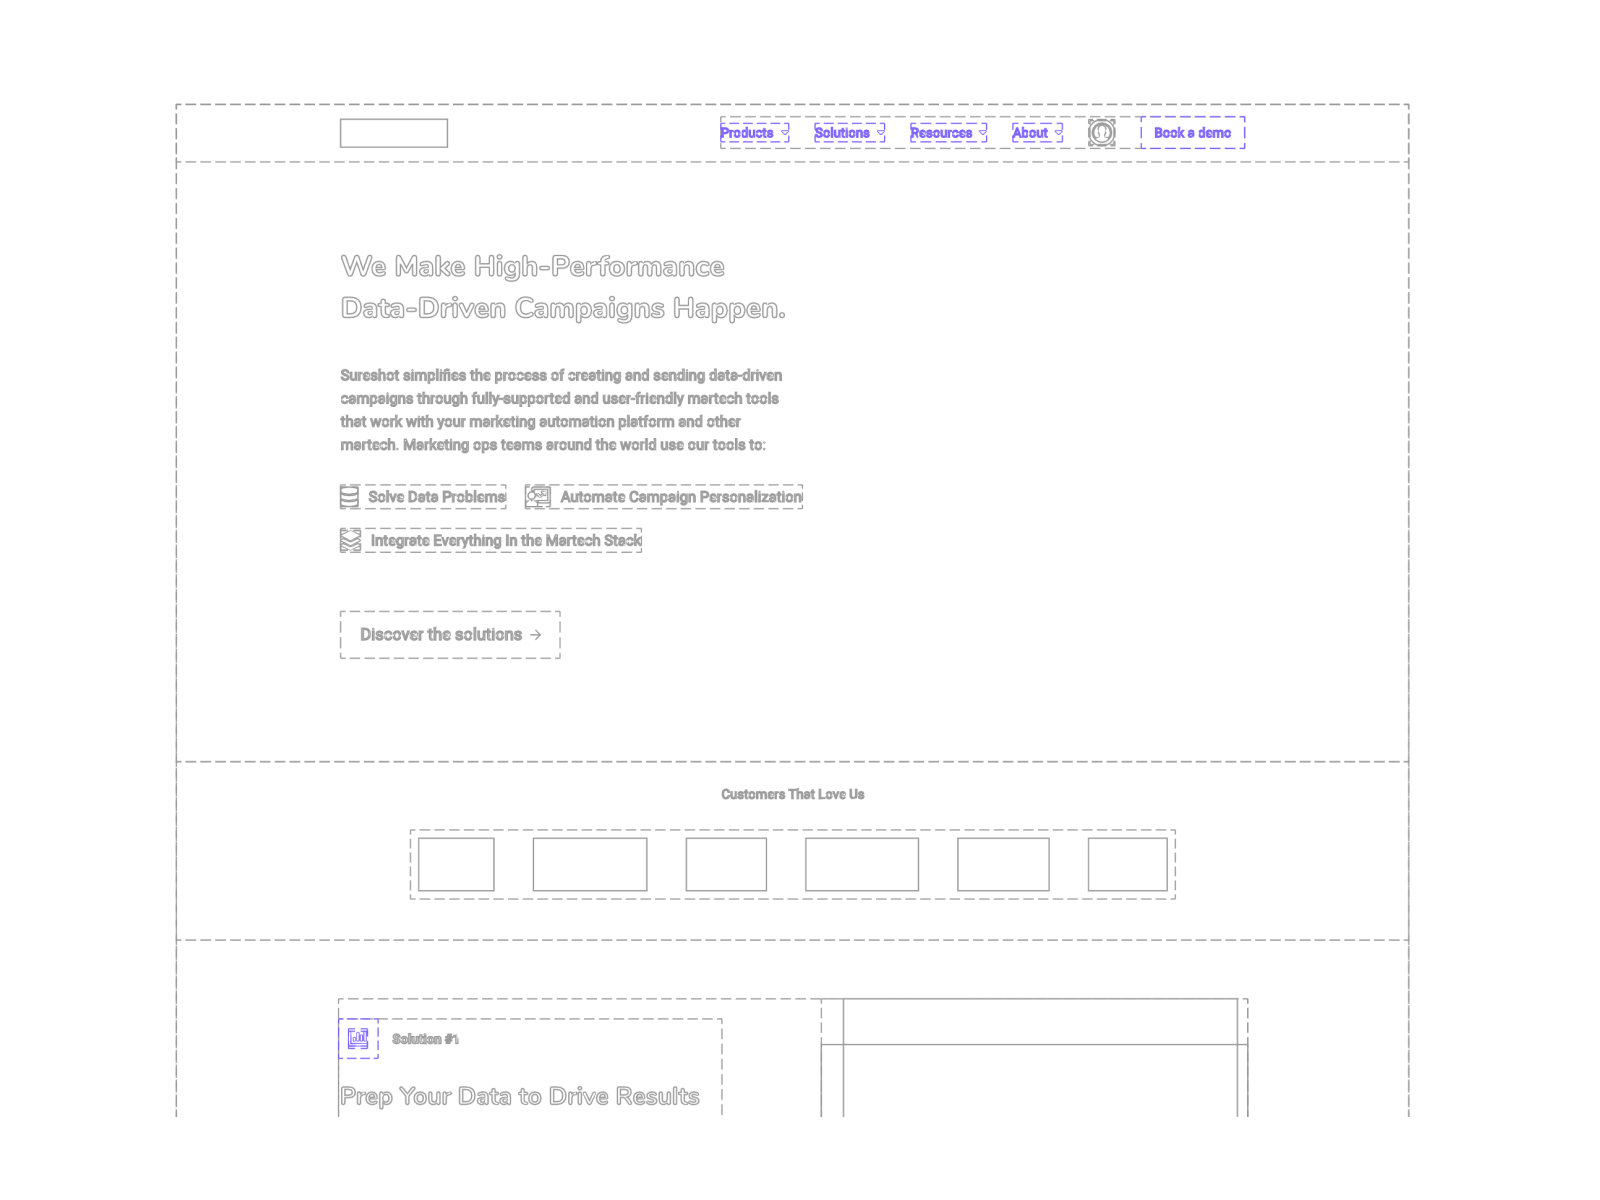 Shown is a wireframe of the homepage